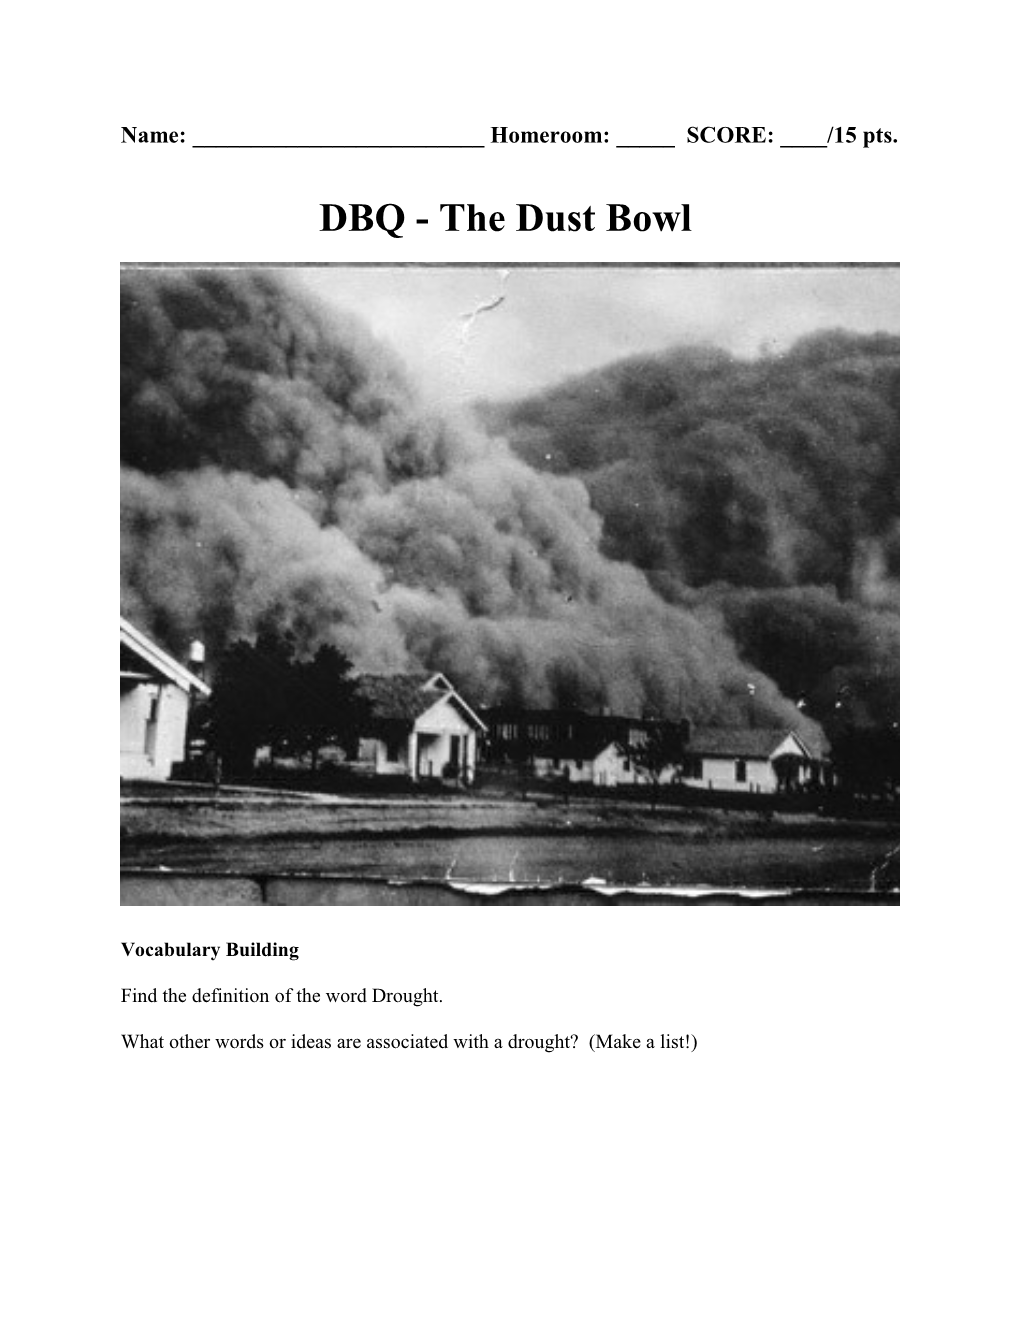 The Dust Bowl Document Based Question